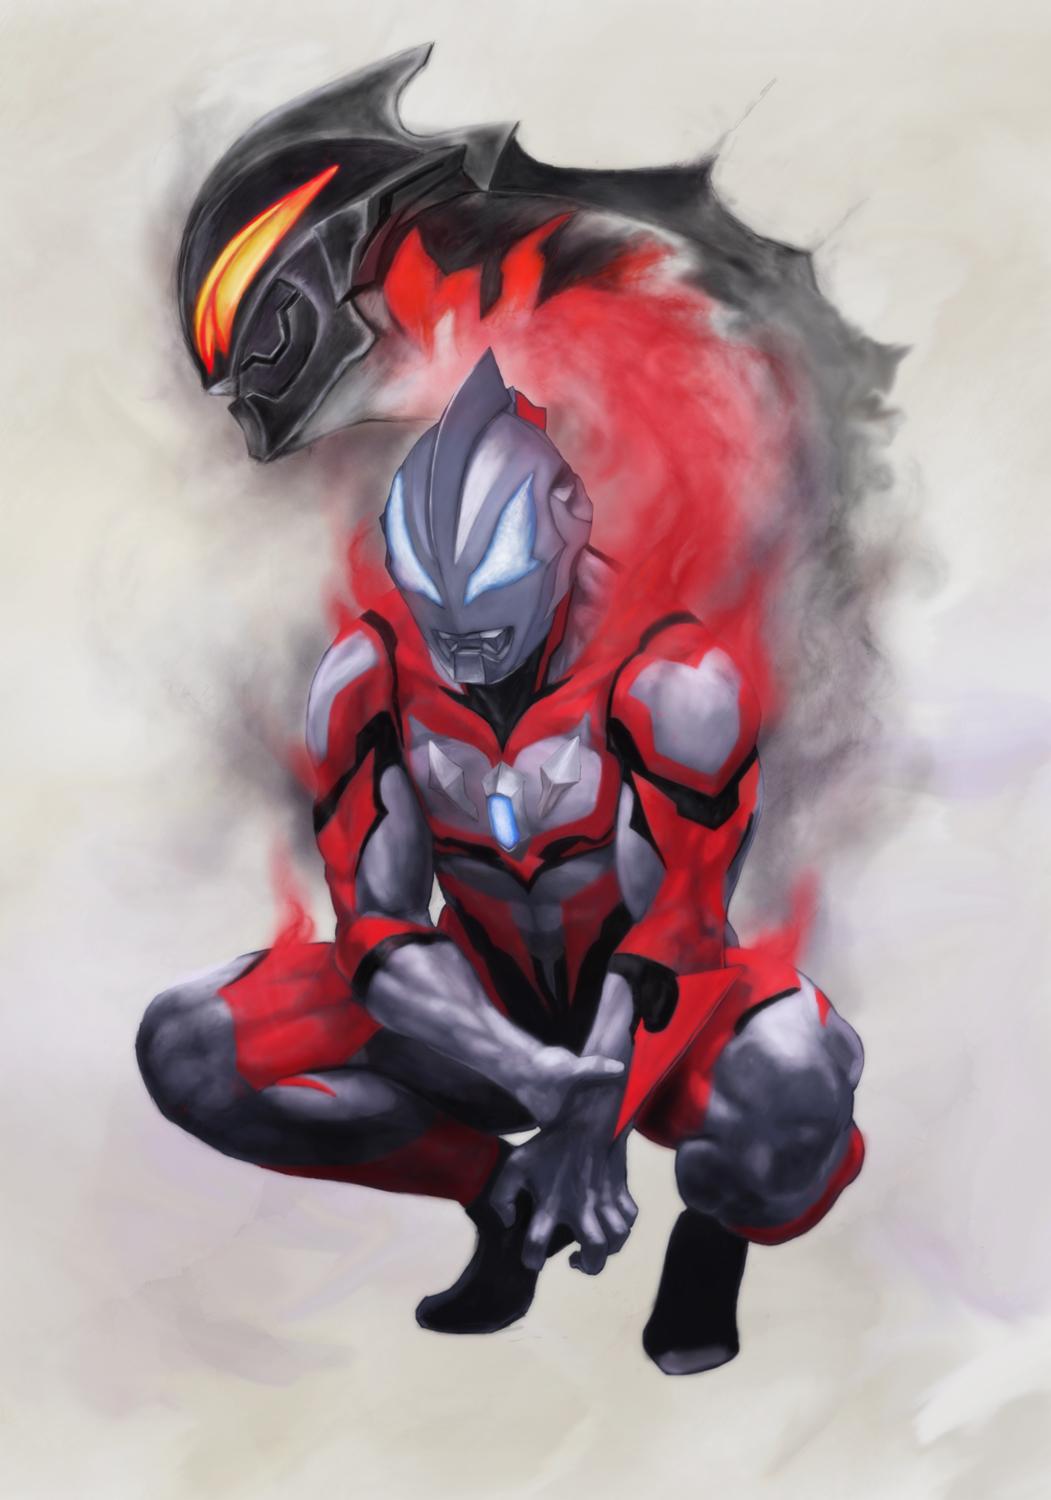 ultraman belial and ultraman geed (ultraman geed (series) and etc